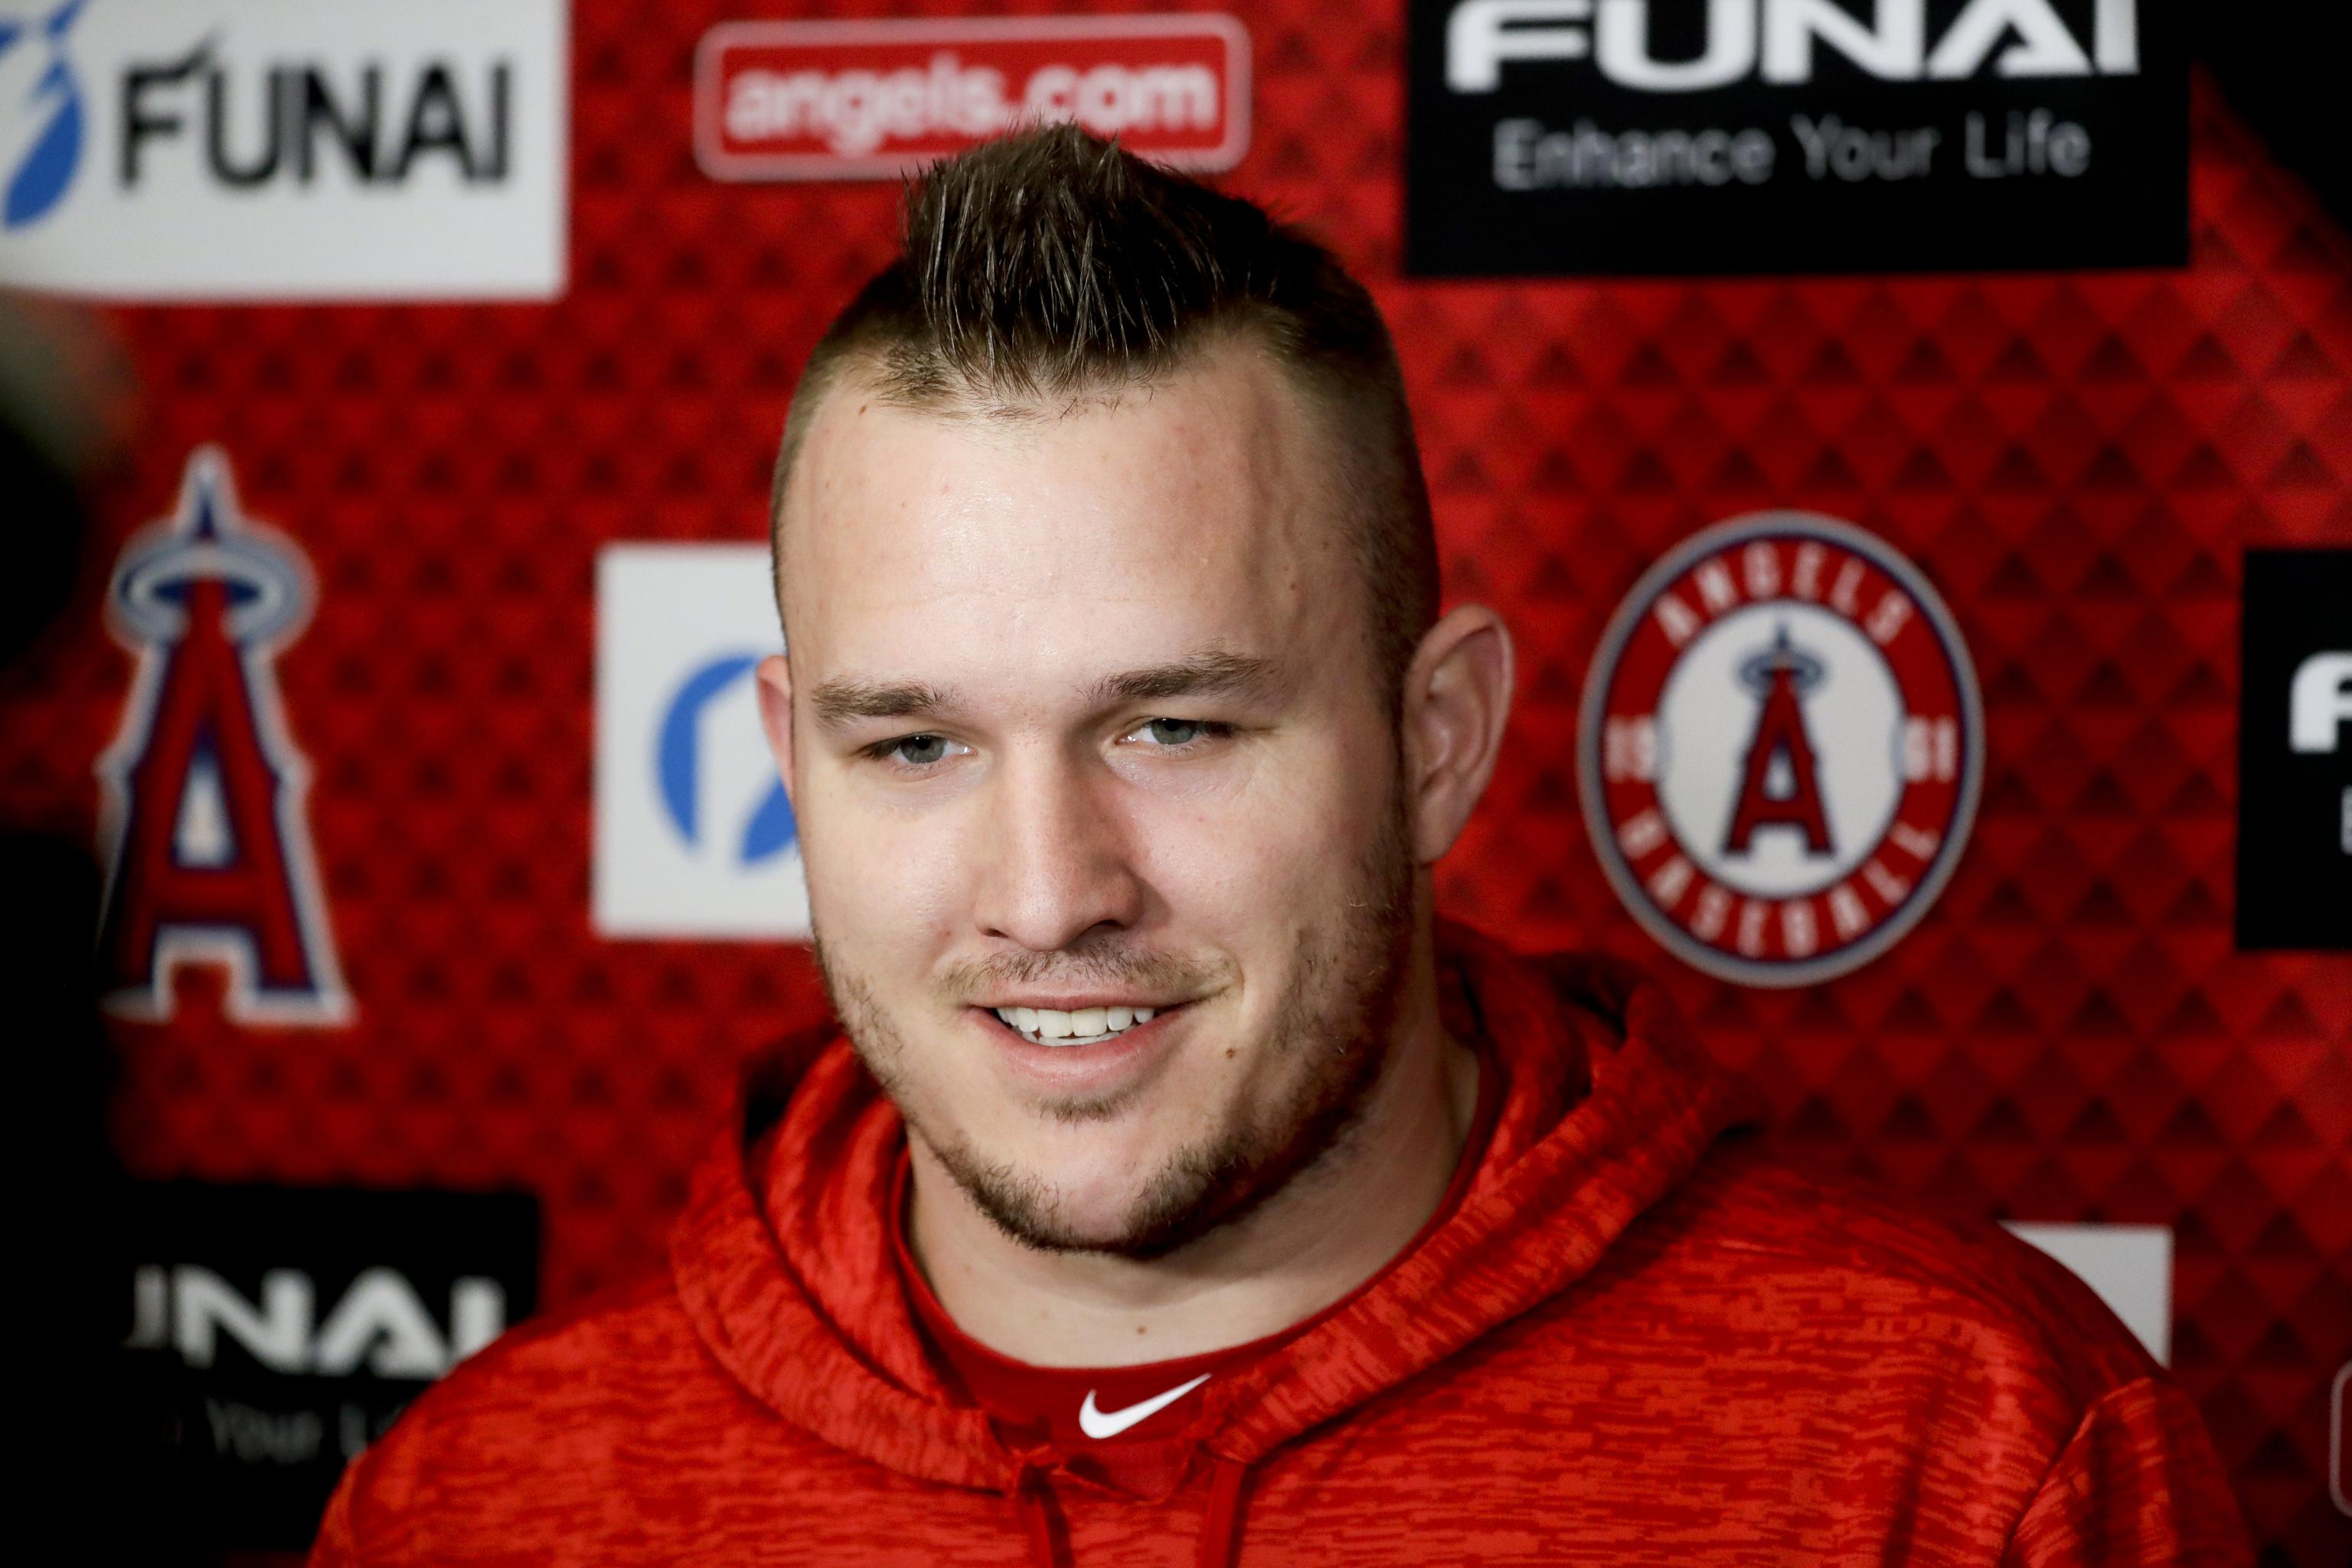 Mike Trout says he's “an Angel for life” with new contract